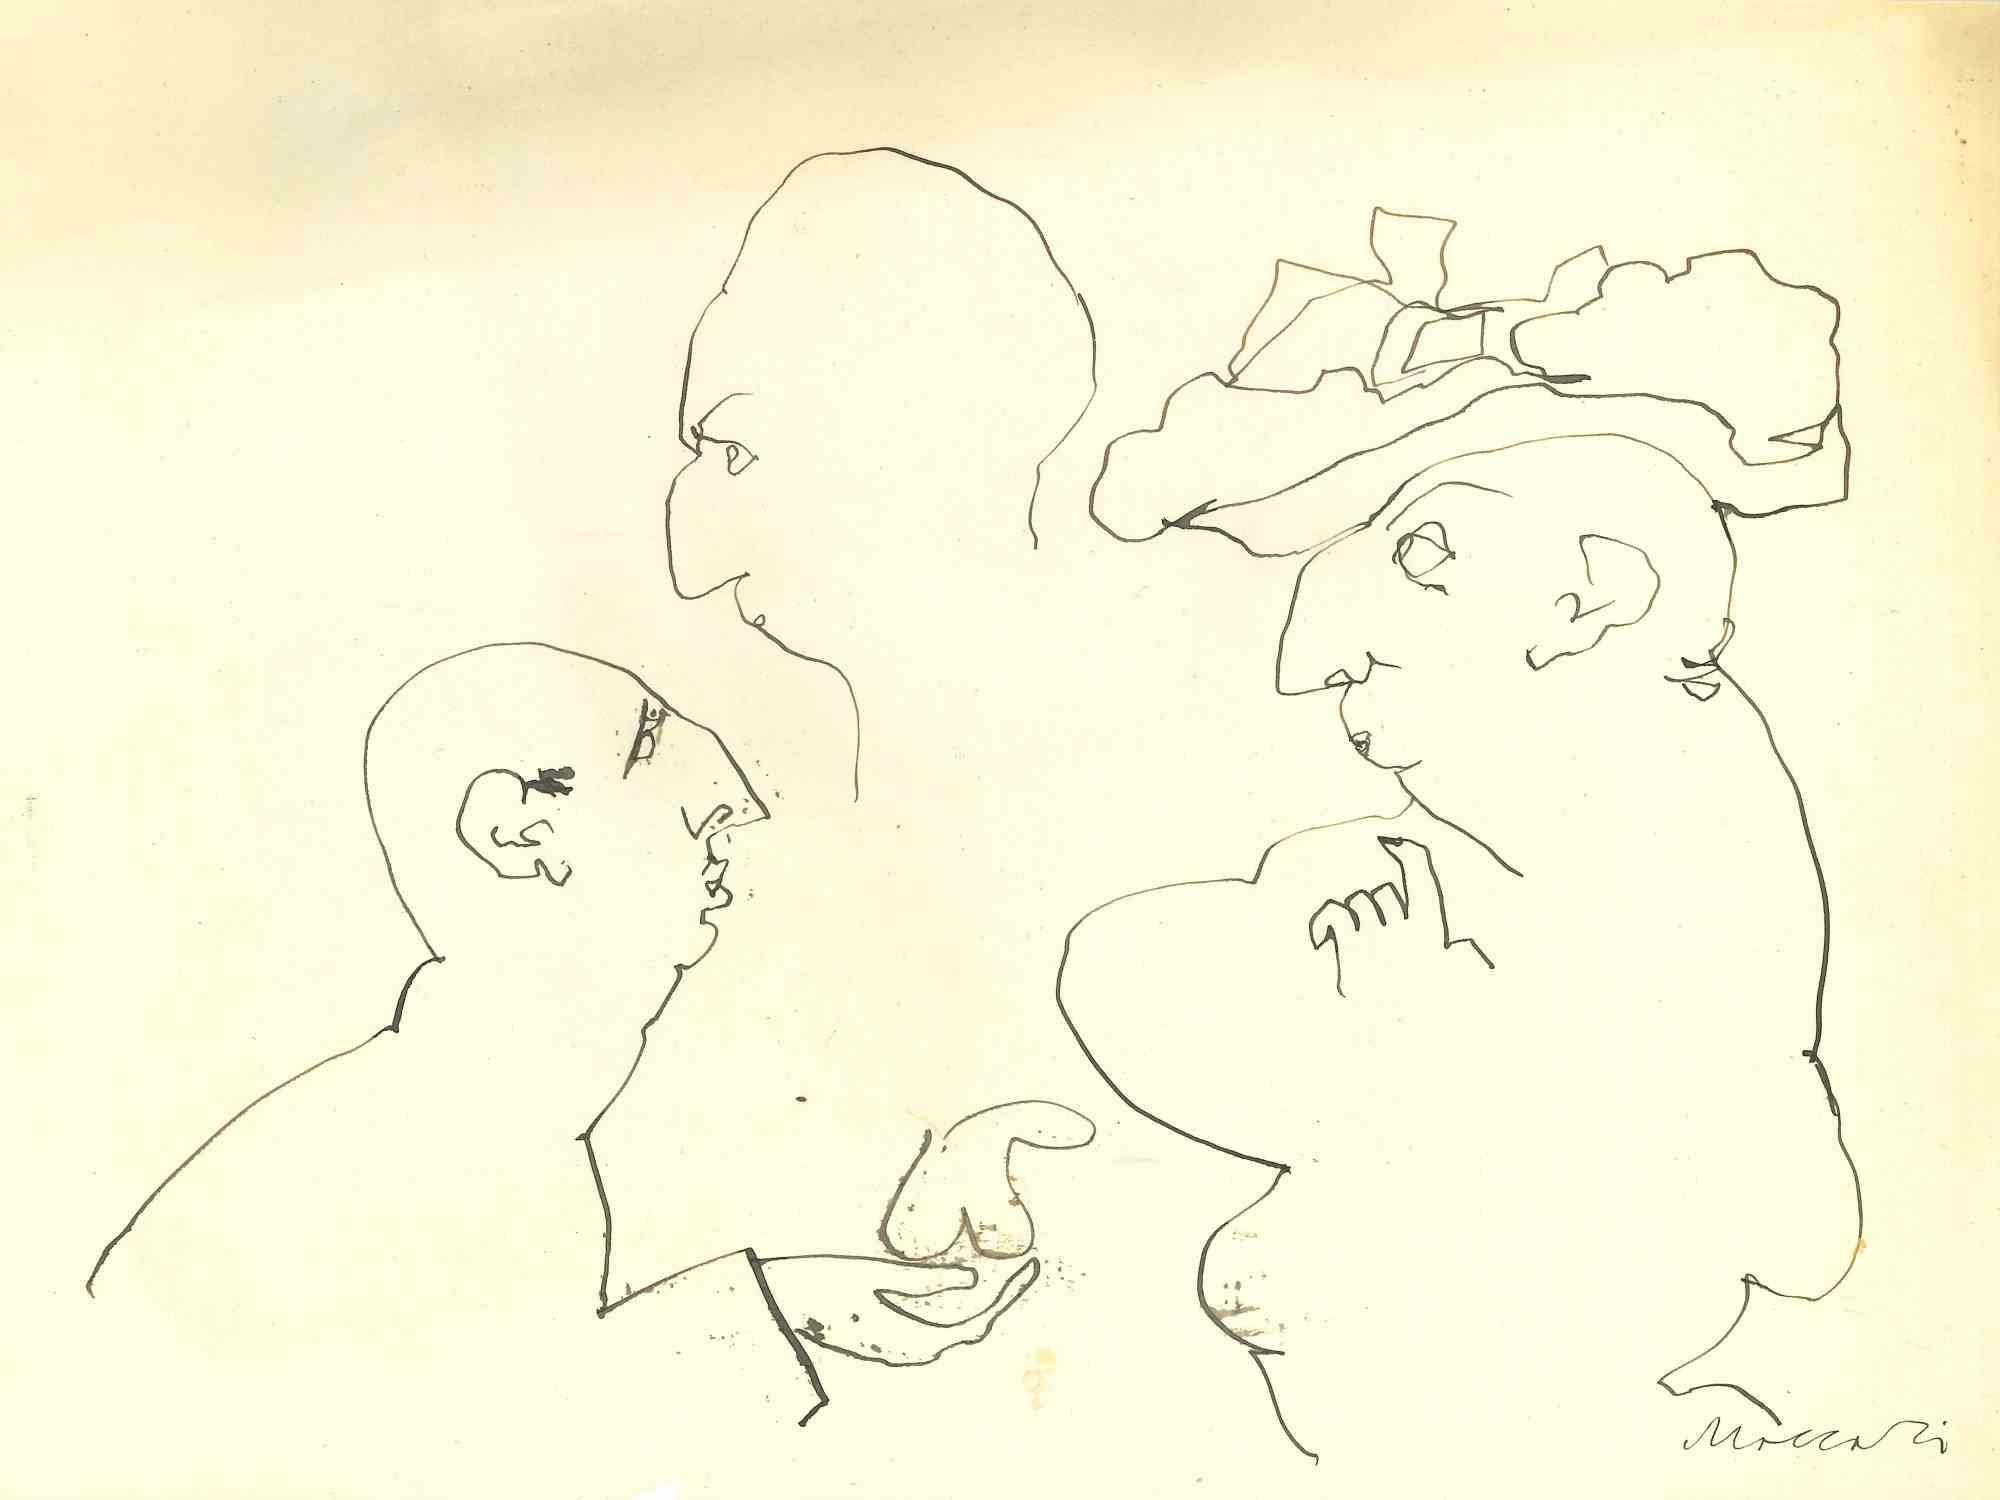 The Donation is a China ink Drawing realized by Mino Maccari  (1924-1989) in the Mid-20th Century.

Hand-signed on the lower.

Good conditions.

Mino Maccari (Siena, 1924-Rome, June 16, 1989) was an Italian writer, painter, engraver and journalist,